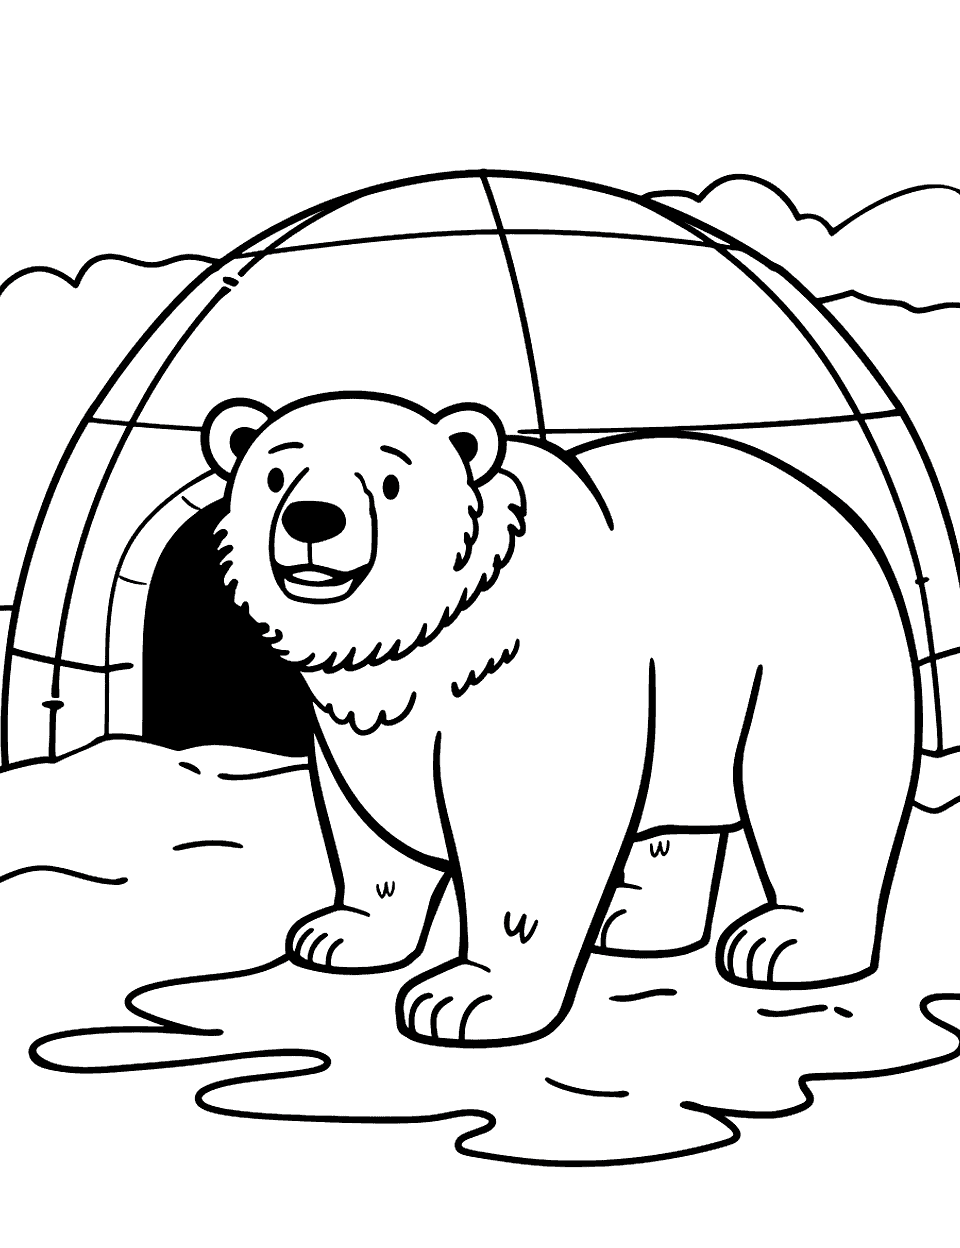 Polar Bear and Igloo Coloring Page - A polar bear curiously checking out an igloo.